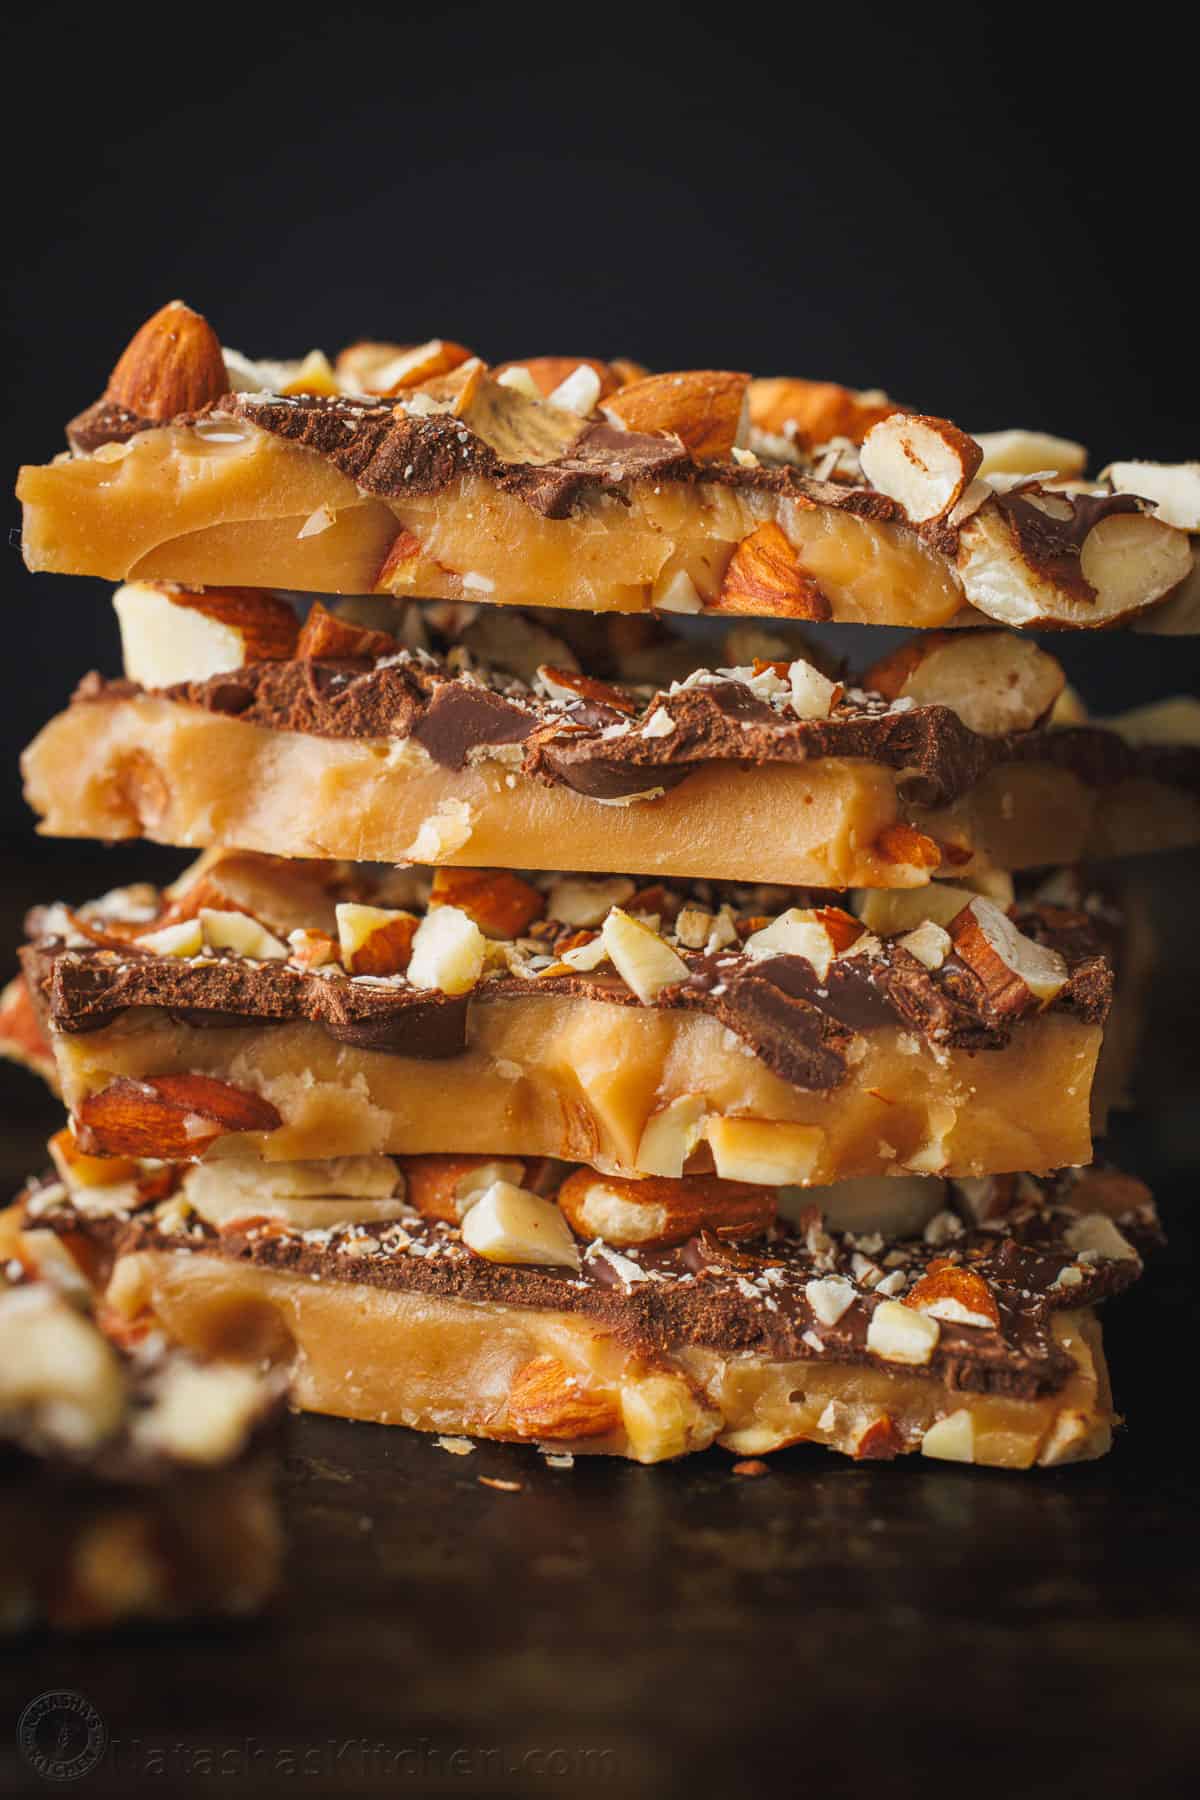 Delicious homemade toffee with almonds and chocolate layers